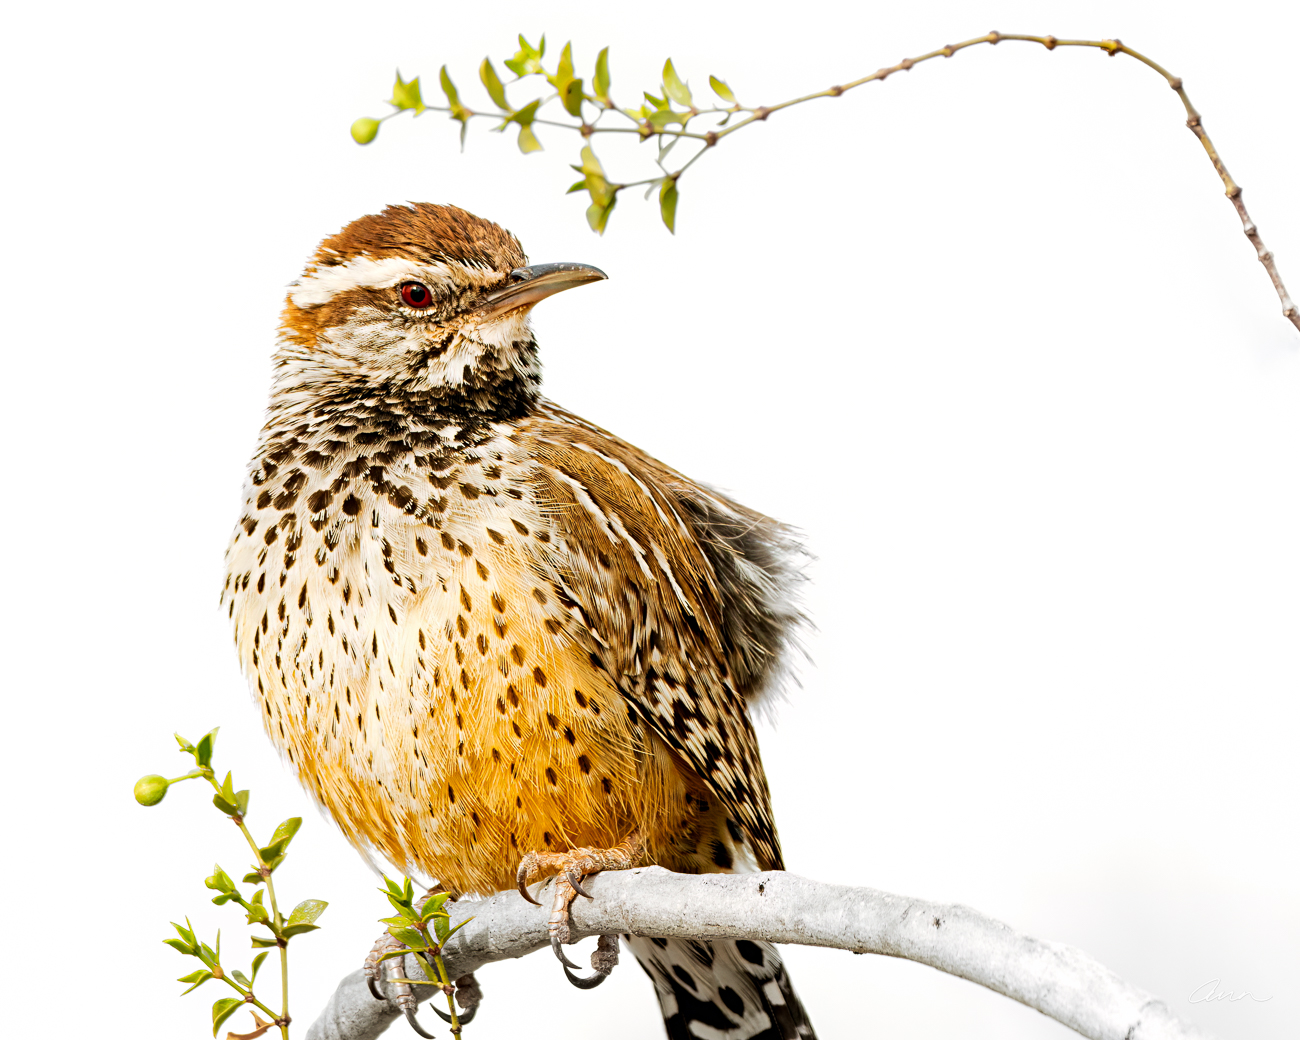 As though sitting for a portraiture for John James Audubon, a cactus wren eyes me with my long lens. He held still long enough...